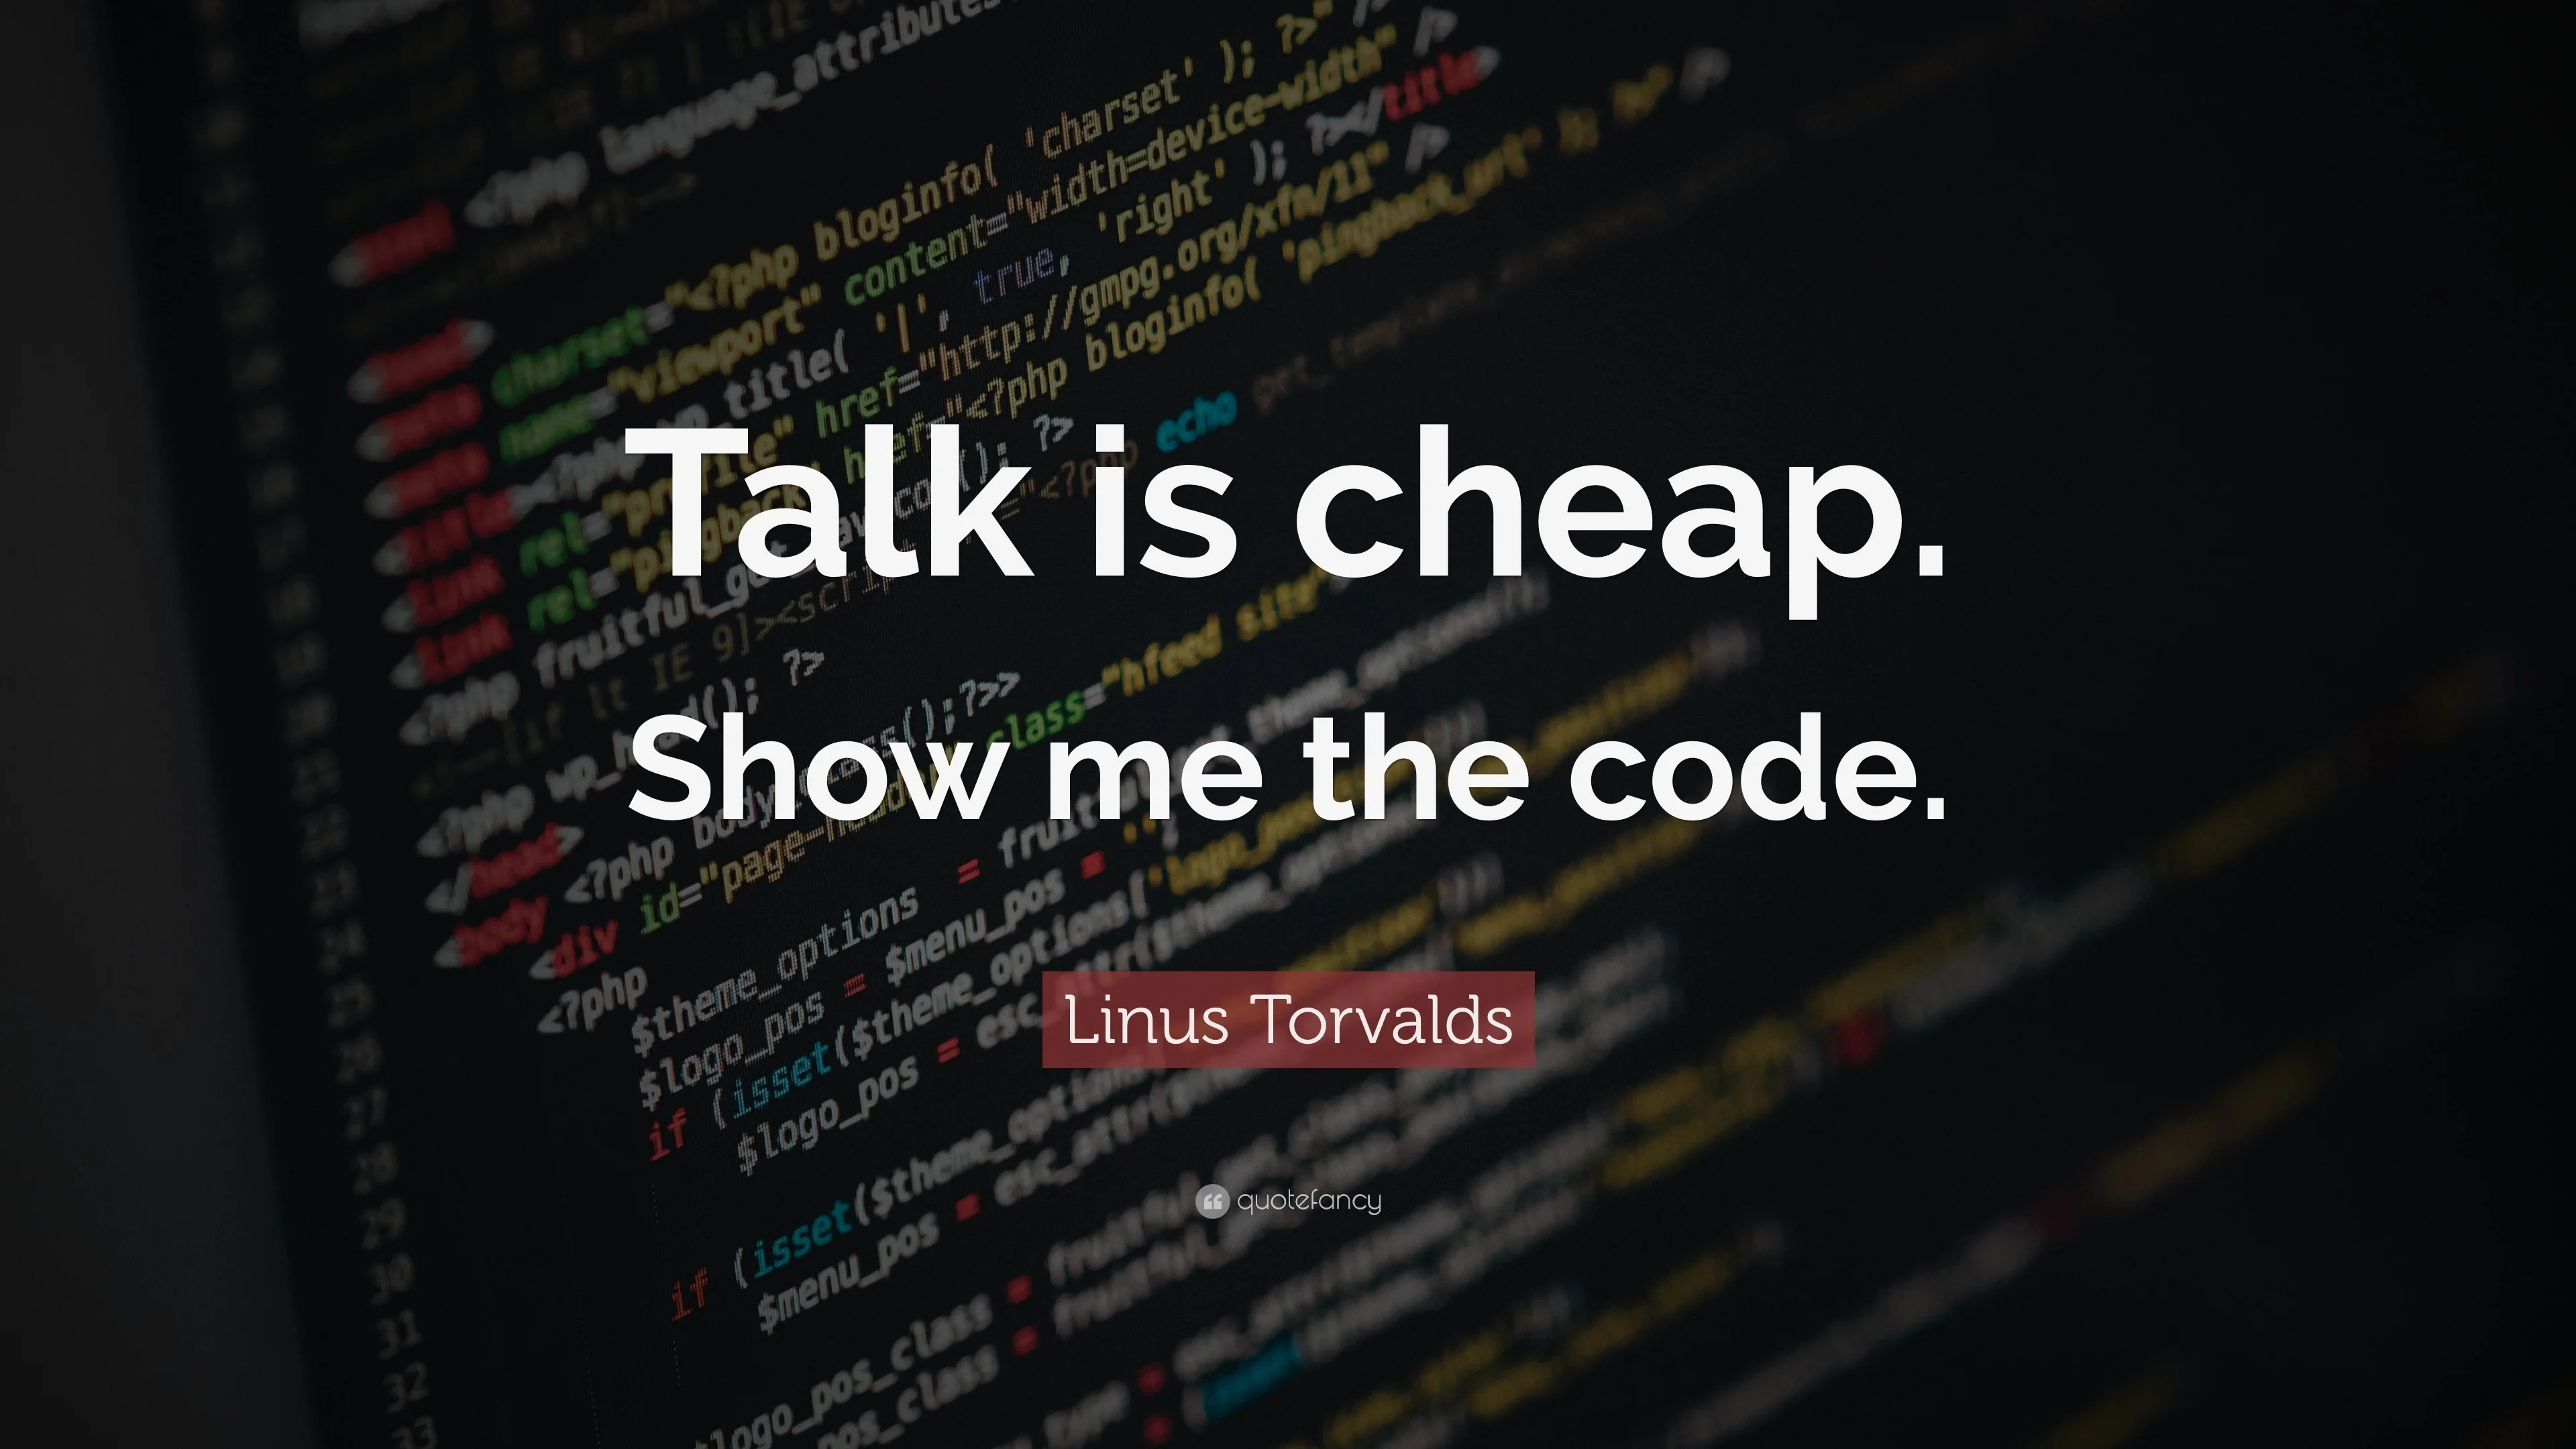 Programming Quotes: “Talk is cheap. Show me the code.” — Linus